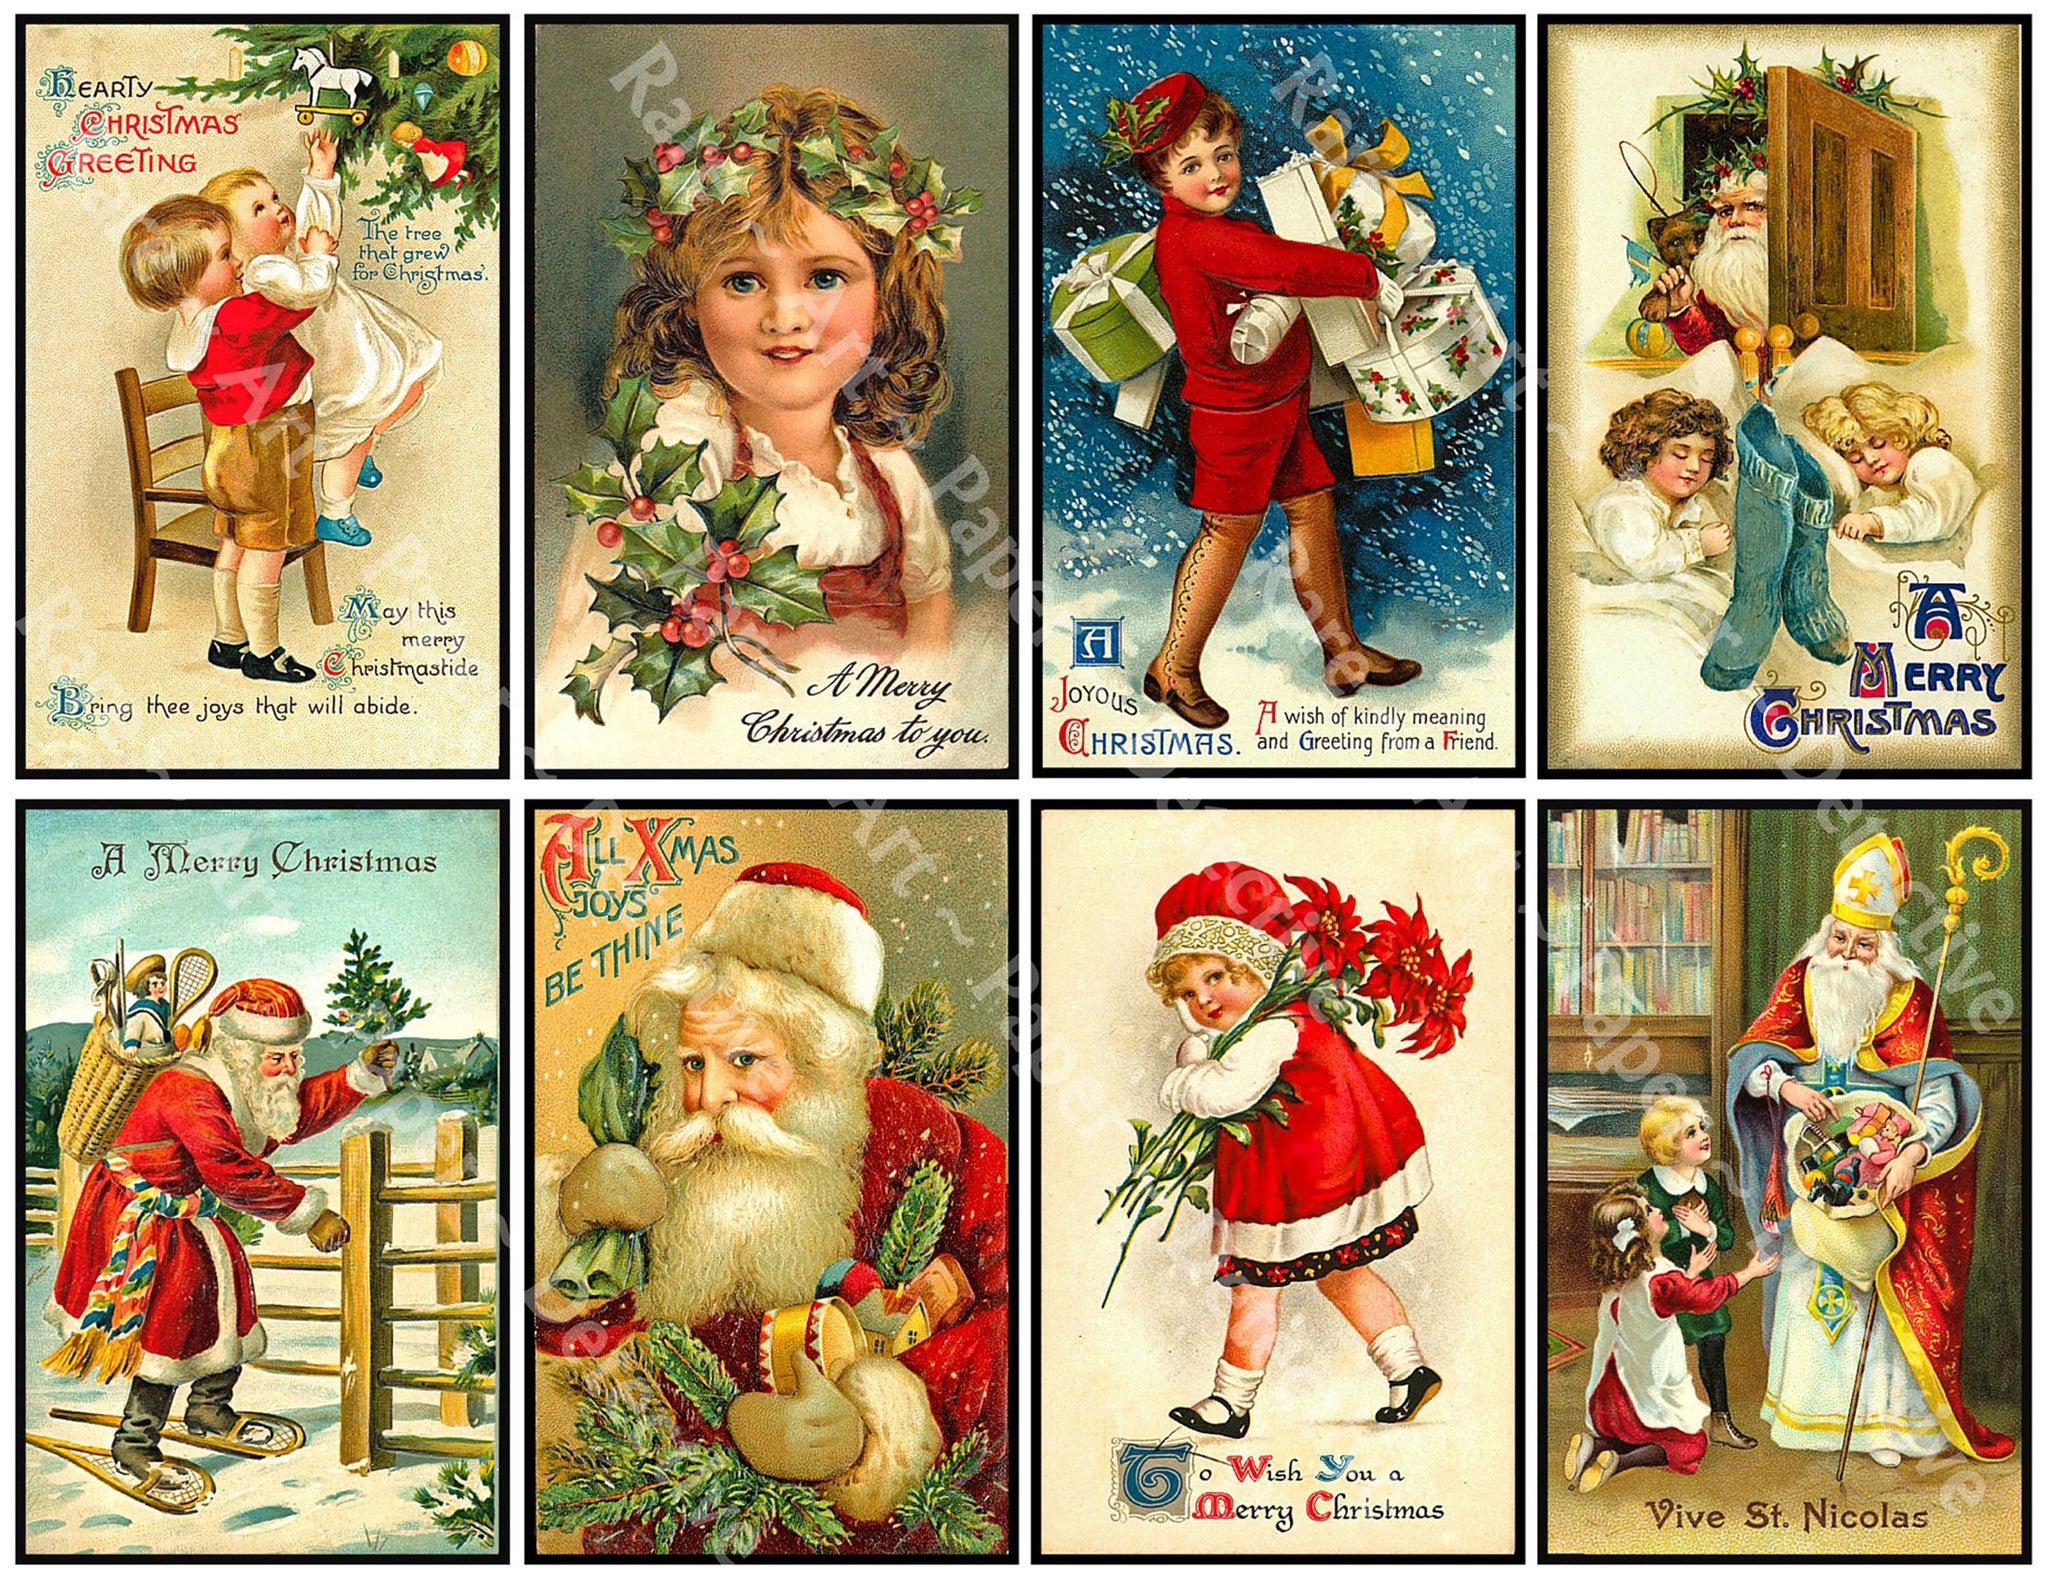 8 Pcs. Christmas Stickers, Deluxe Set of Old Fashioned Postcard Journal Images, 4" x 2.5" each, Santa Claus & Merry Christmas Greetings, 845